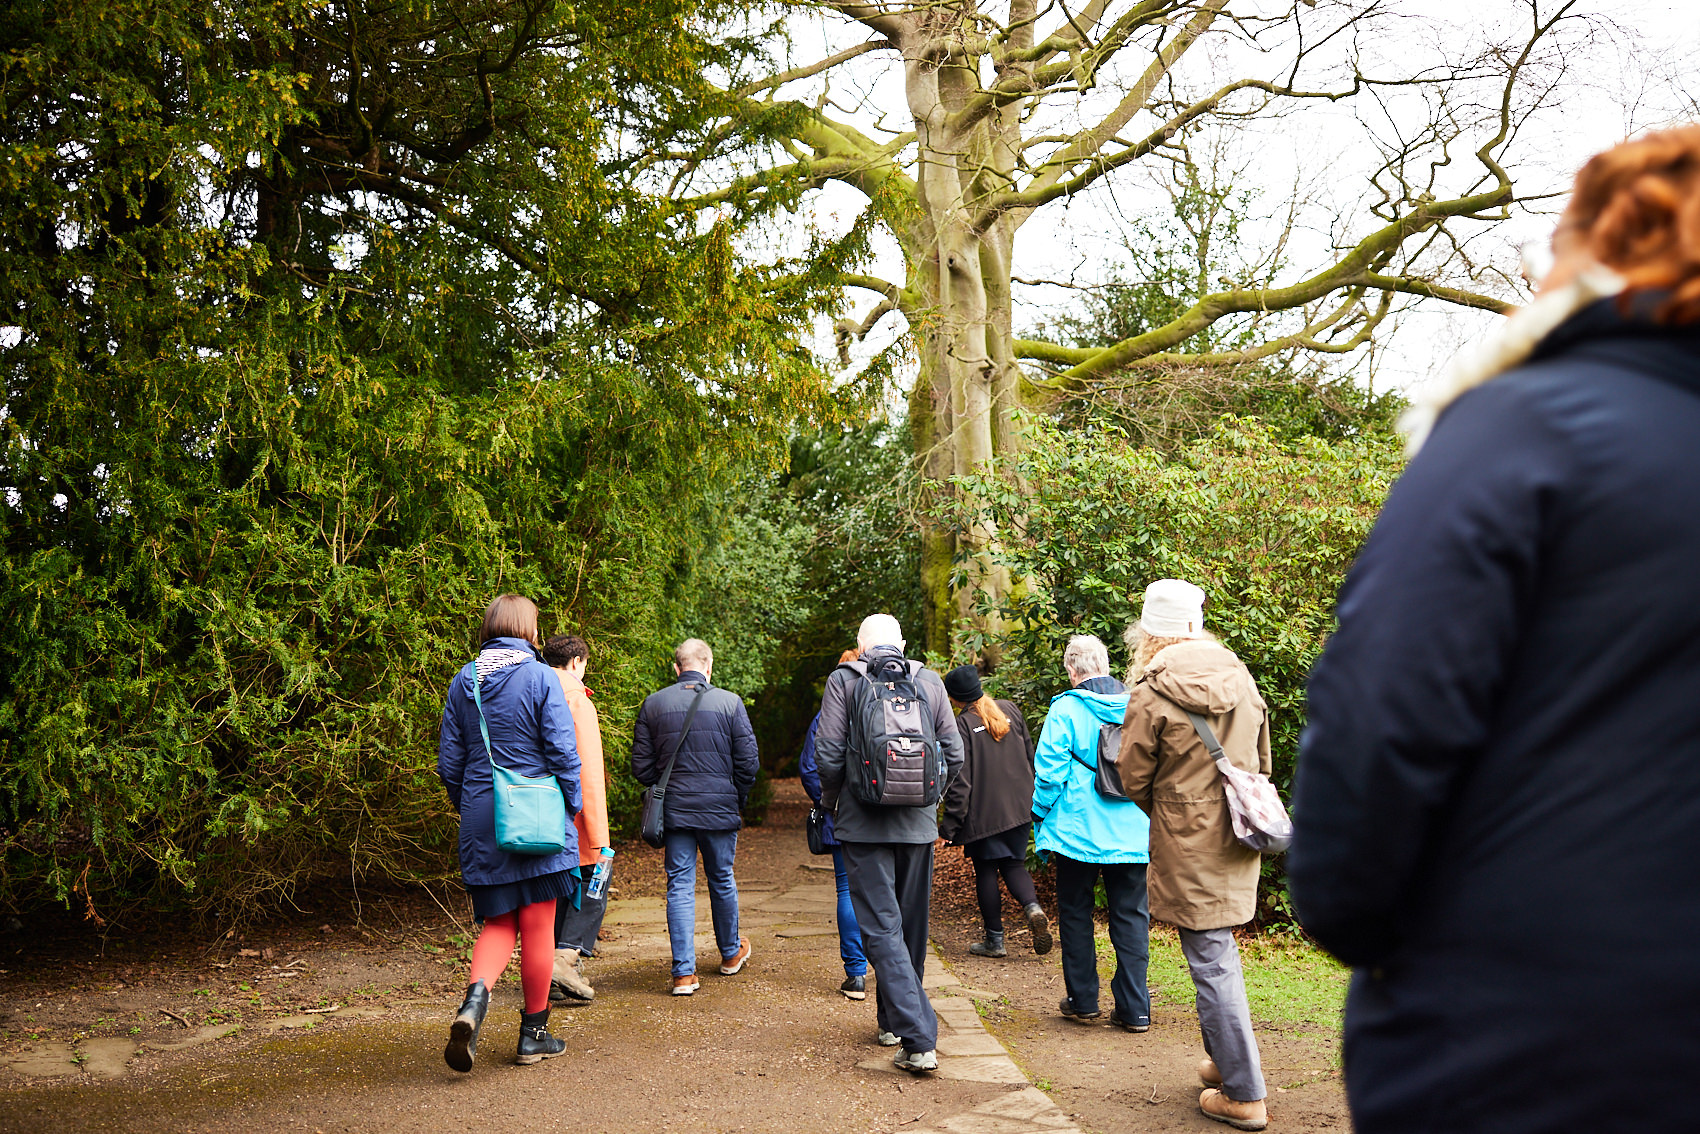 A group of people wearing winter coats, walking on a path between trees.